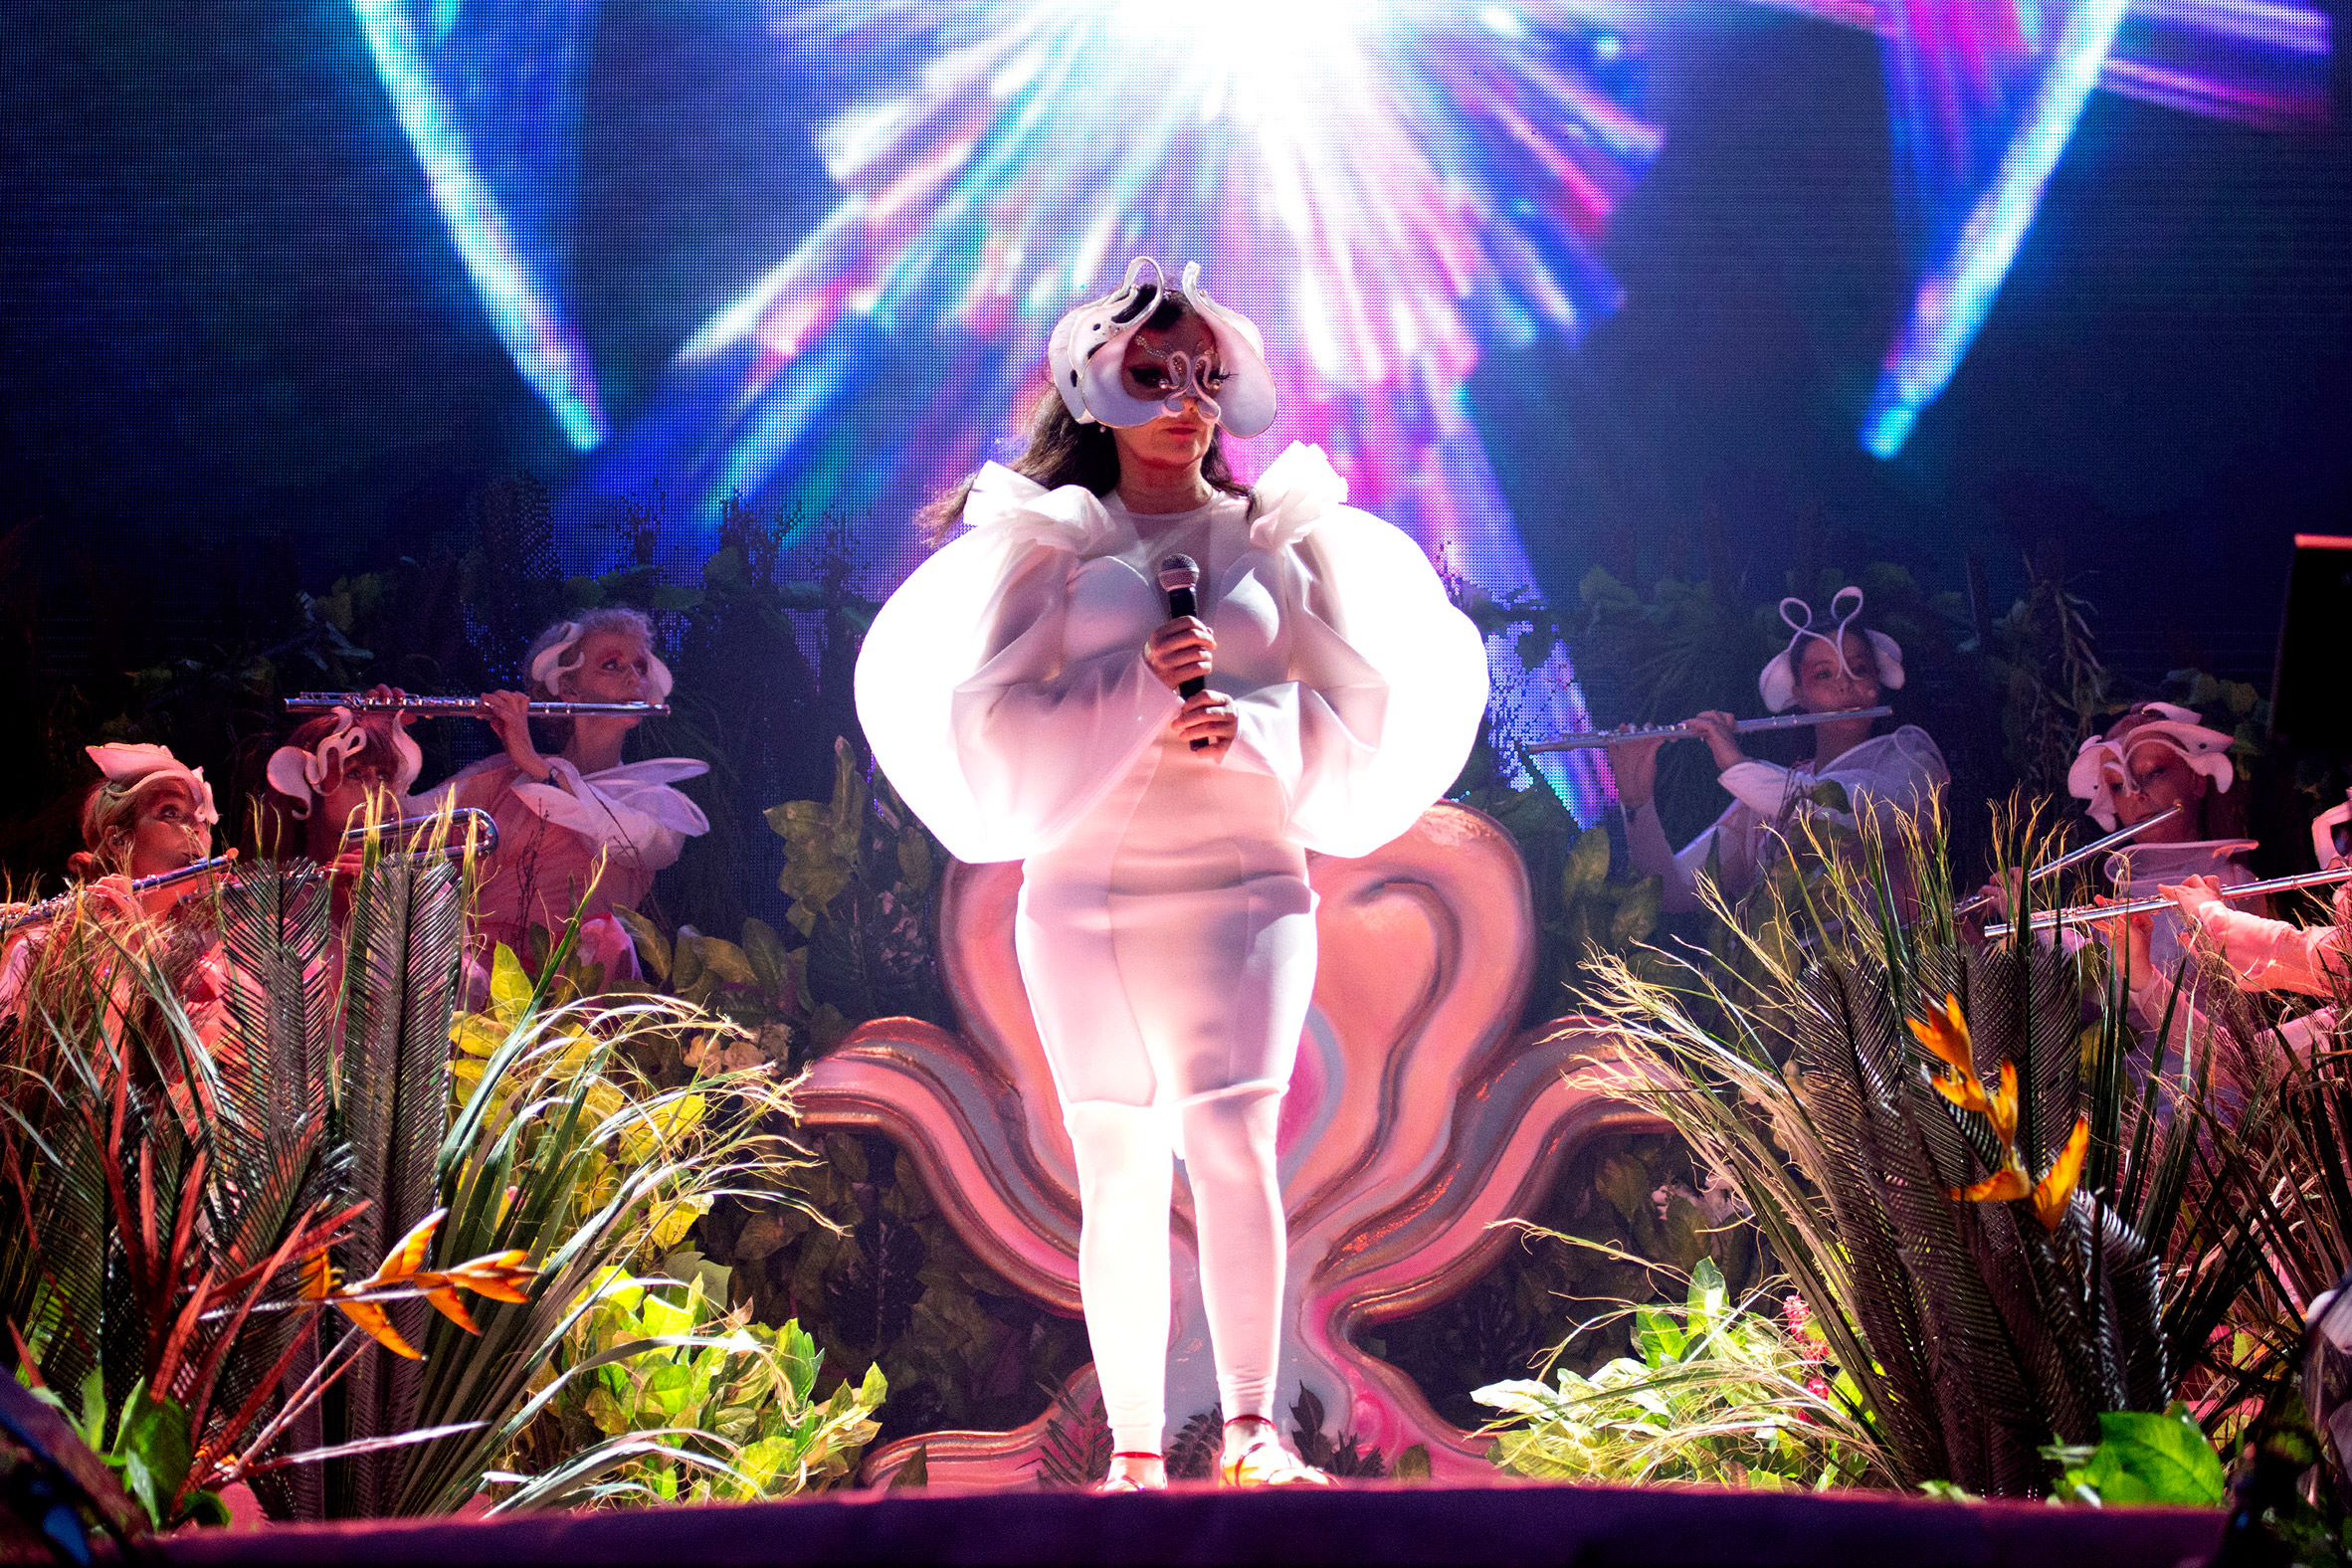 Björk explains designs of "magically utopian" sets and costumes Dr